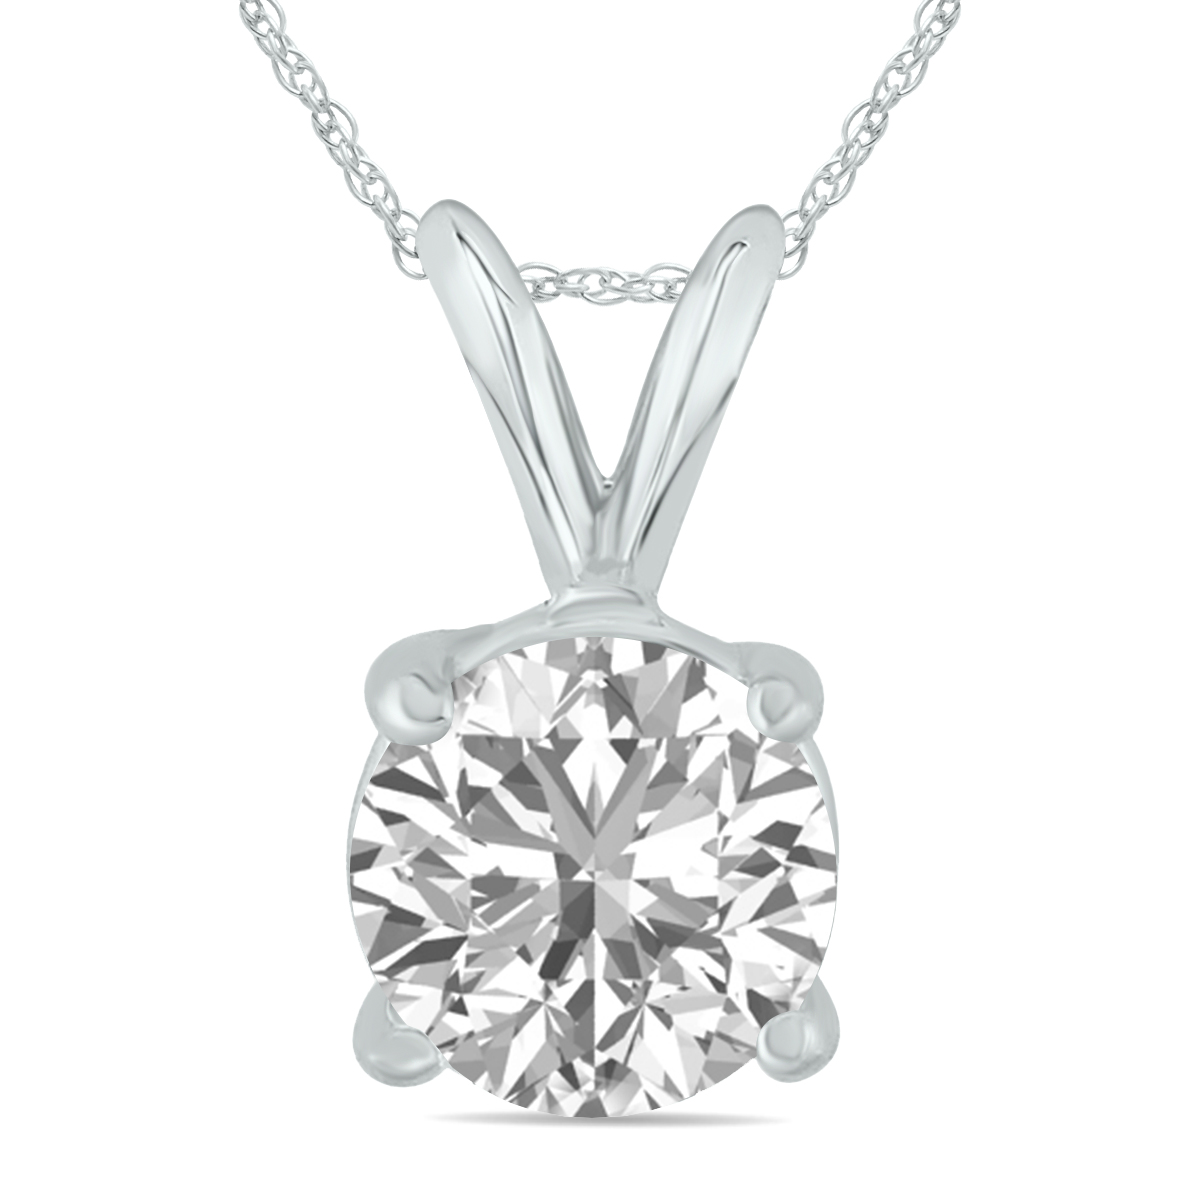 Image of IGI Certified Lab Grown 1 1/4 Carat Diamond Solitaire Pendant in 14K White Gold (I Color SI1 Clarity)